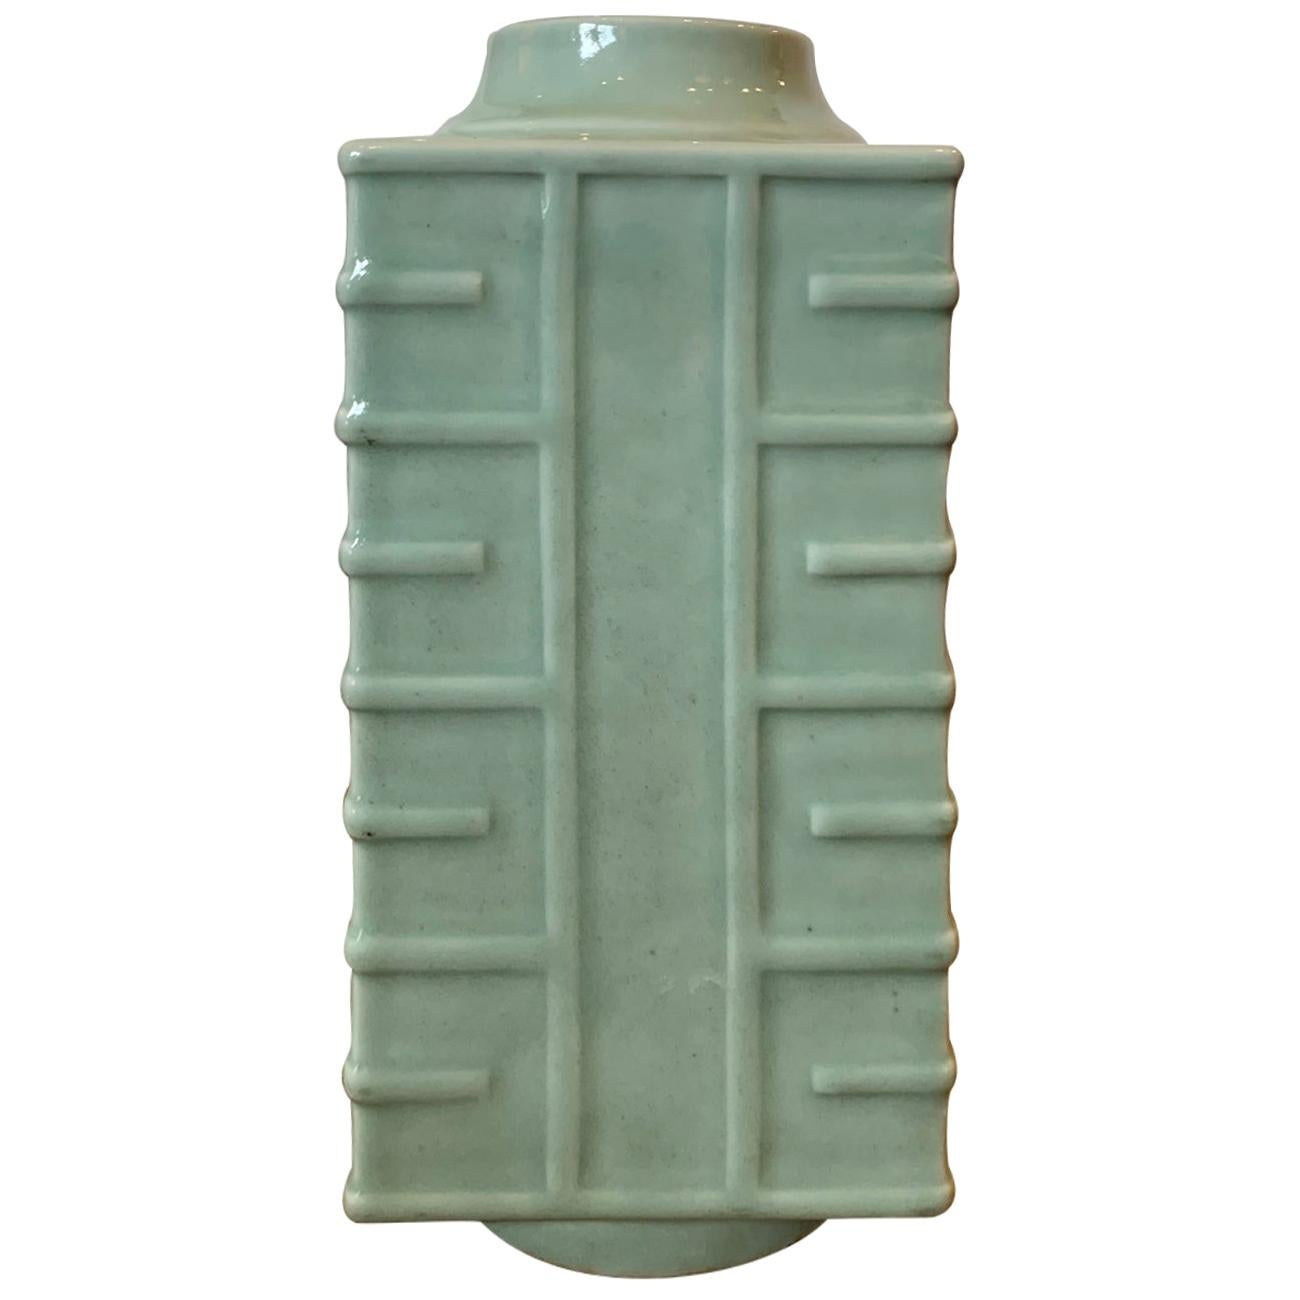 Late 19th-Early 20th Century Glazed Celadon Porcelain Square Cong Form Vase